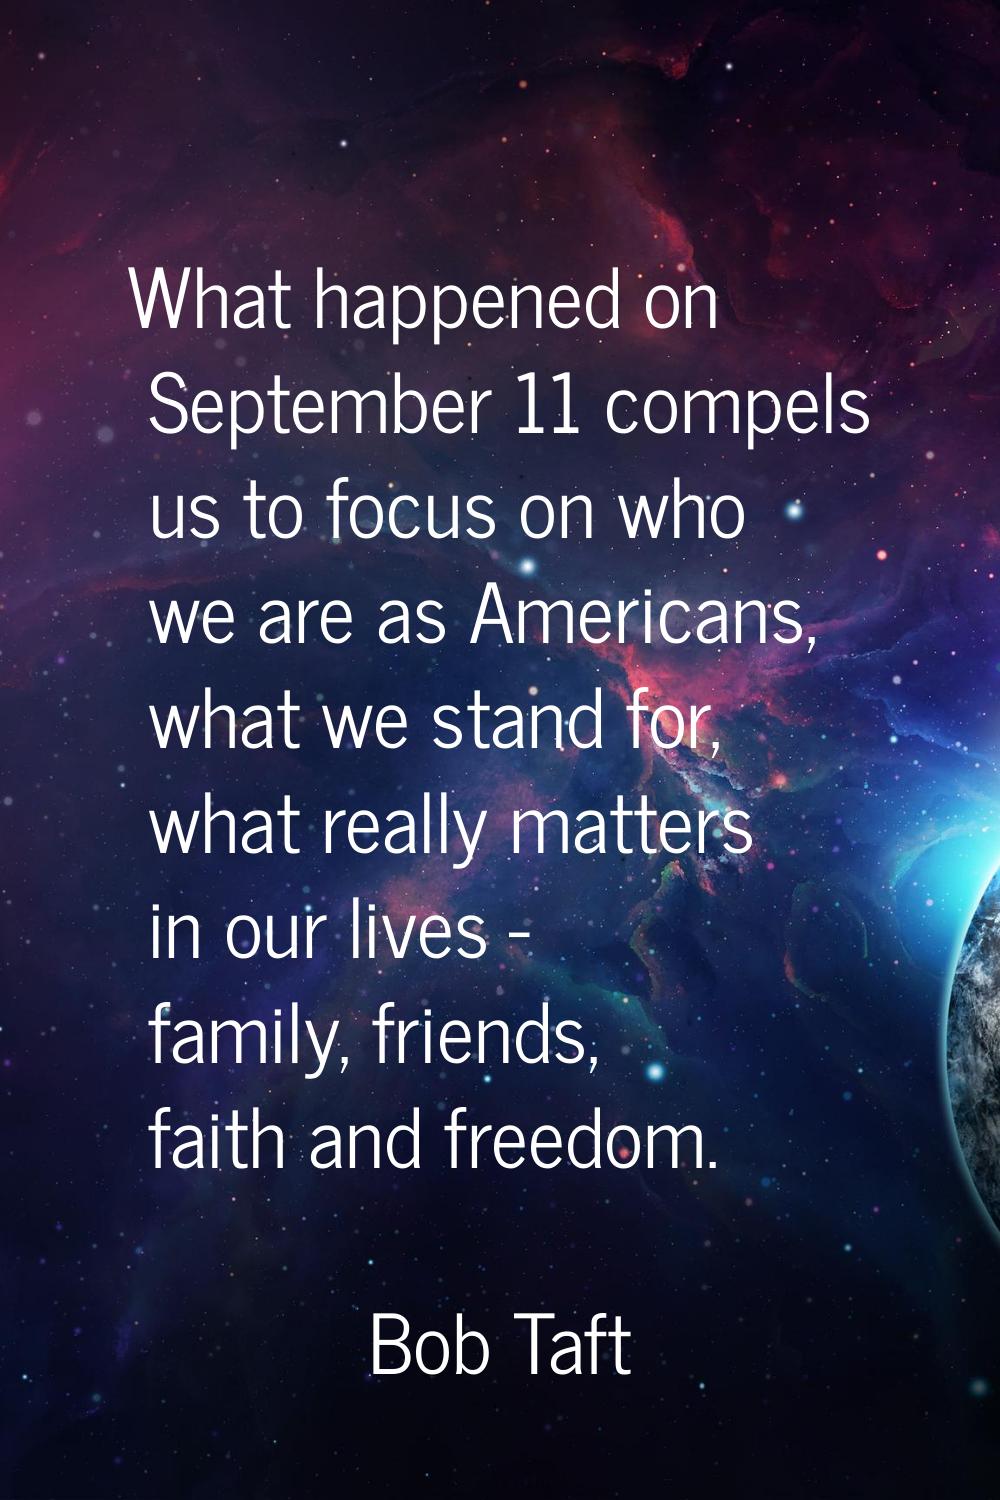 What happened on September 11 compels us to focus on who we are as Americans, what we stand for, wh